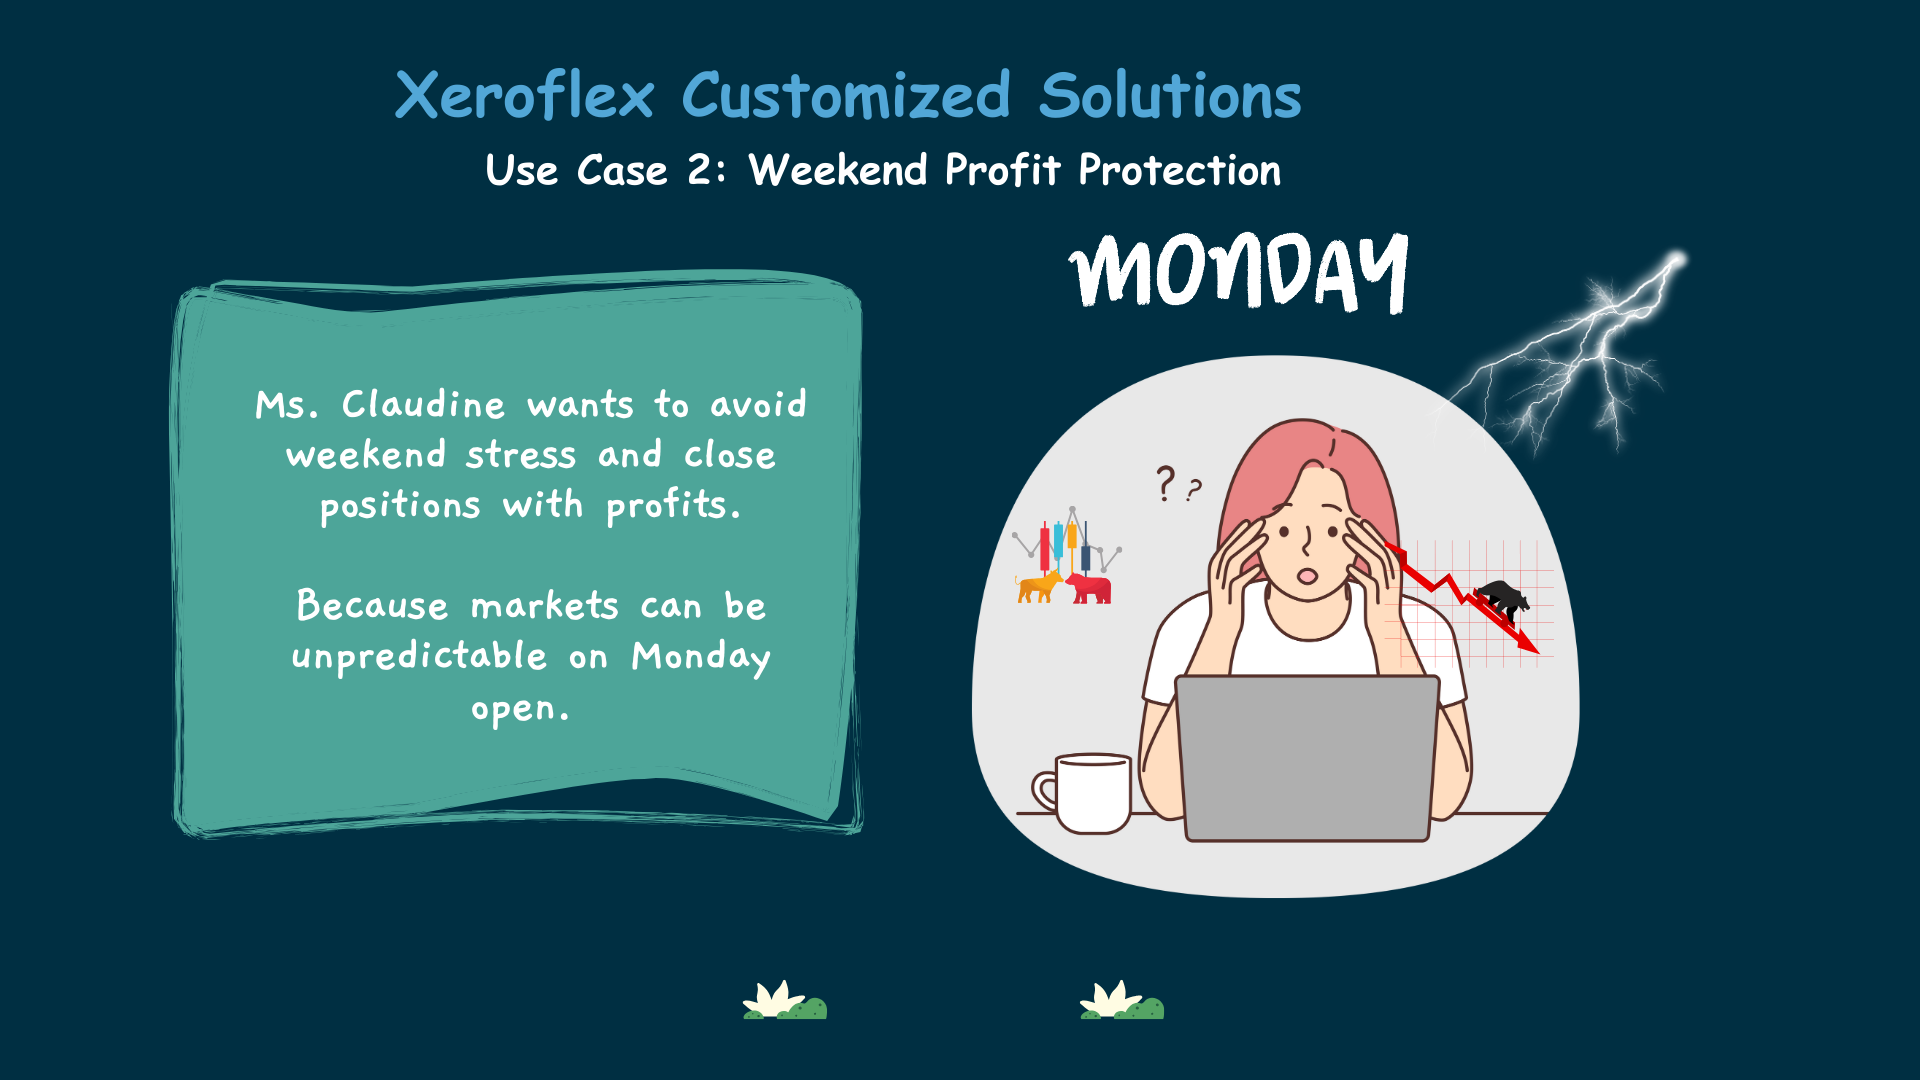 Use Case 2: Weekend Profit Protection